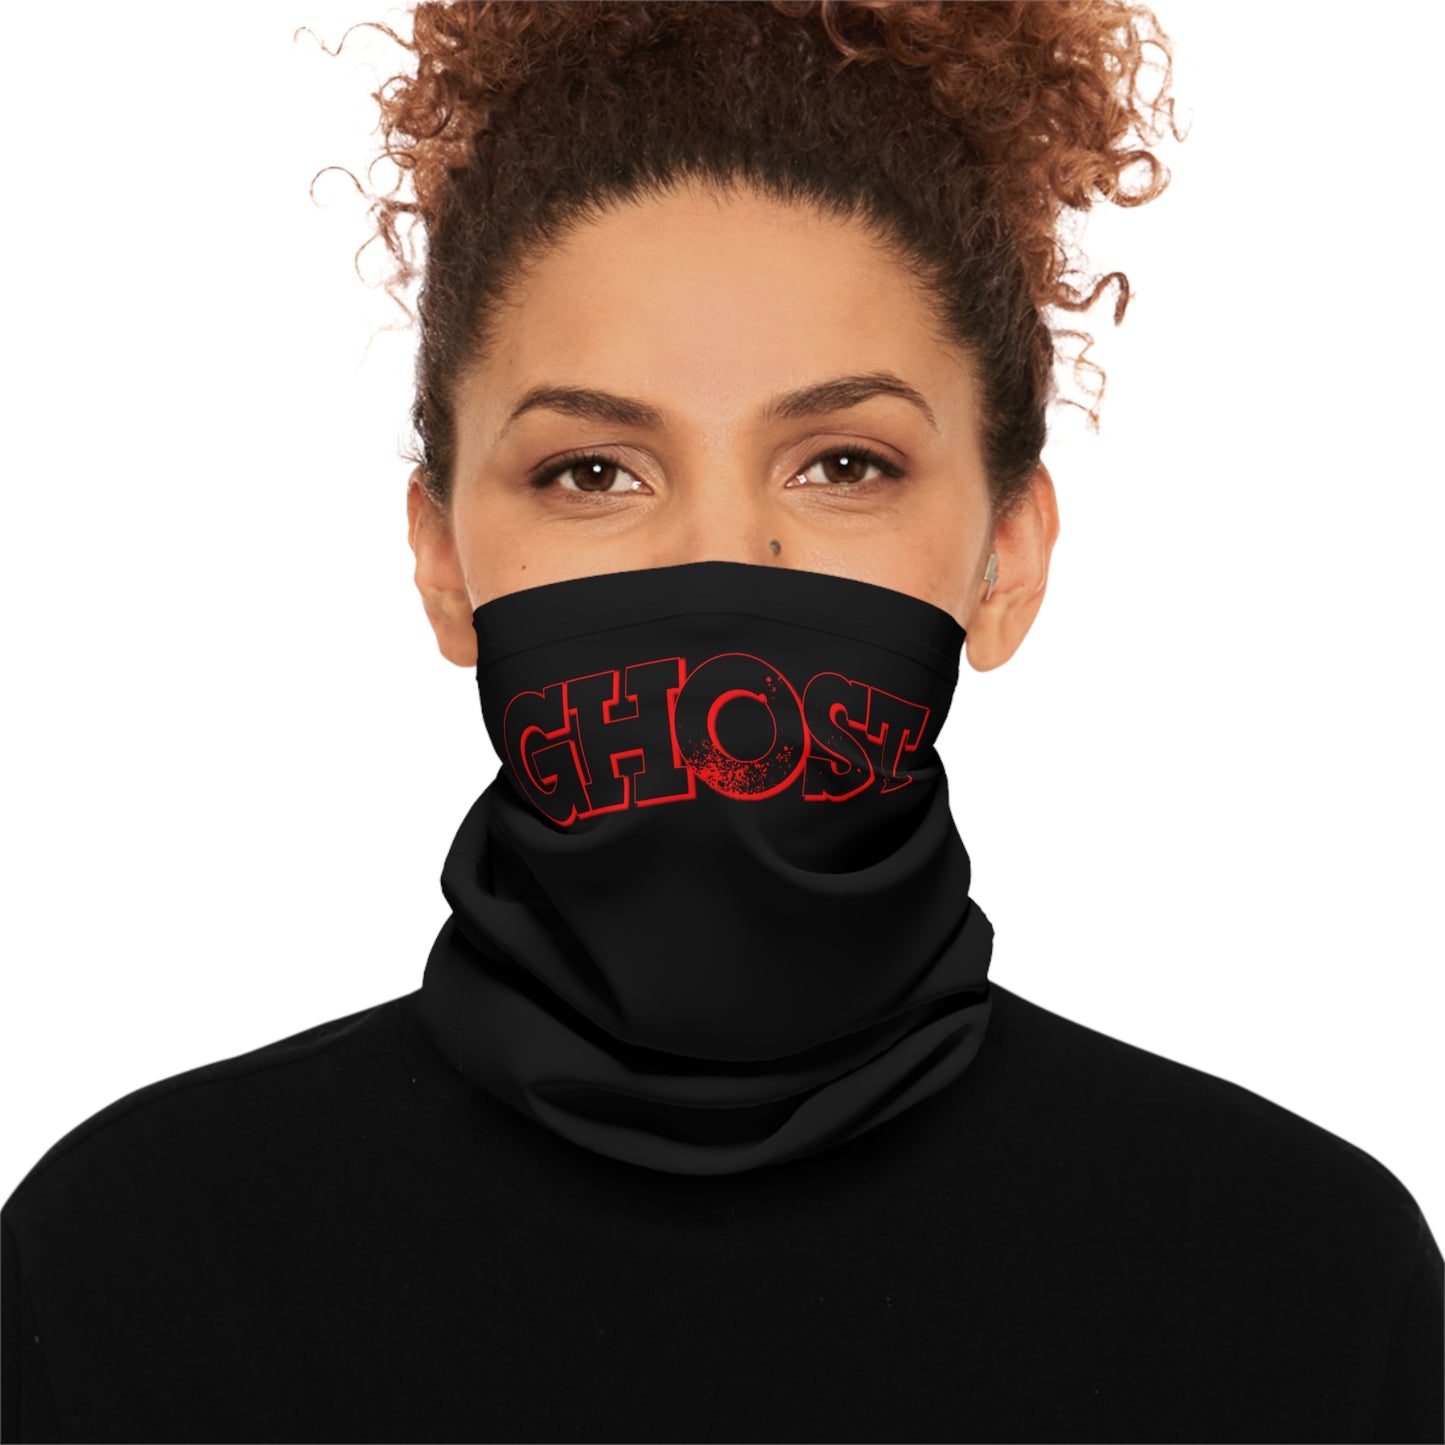 Ghost Power Mask Face Covering Neck Gaiter